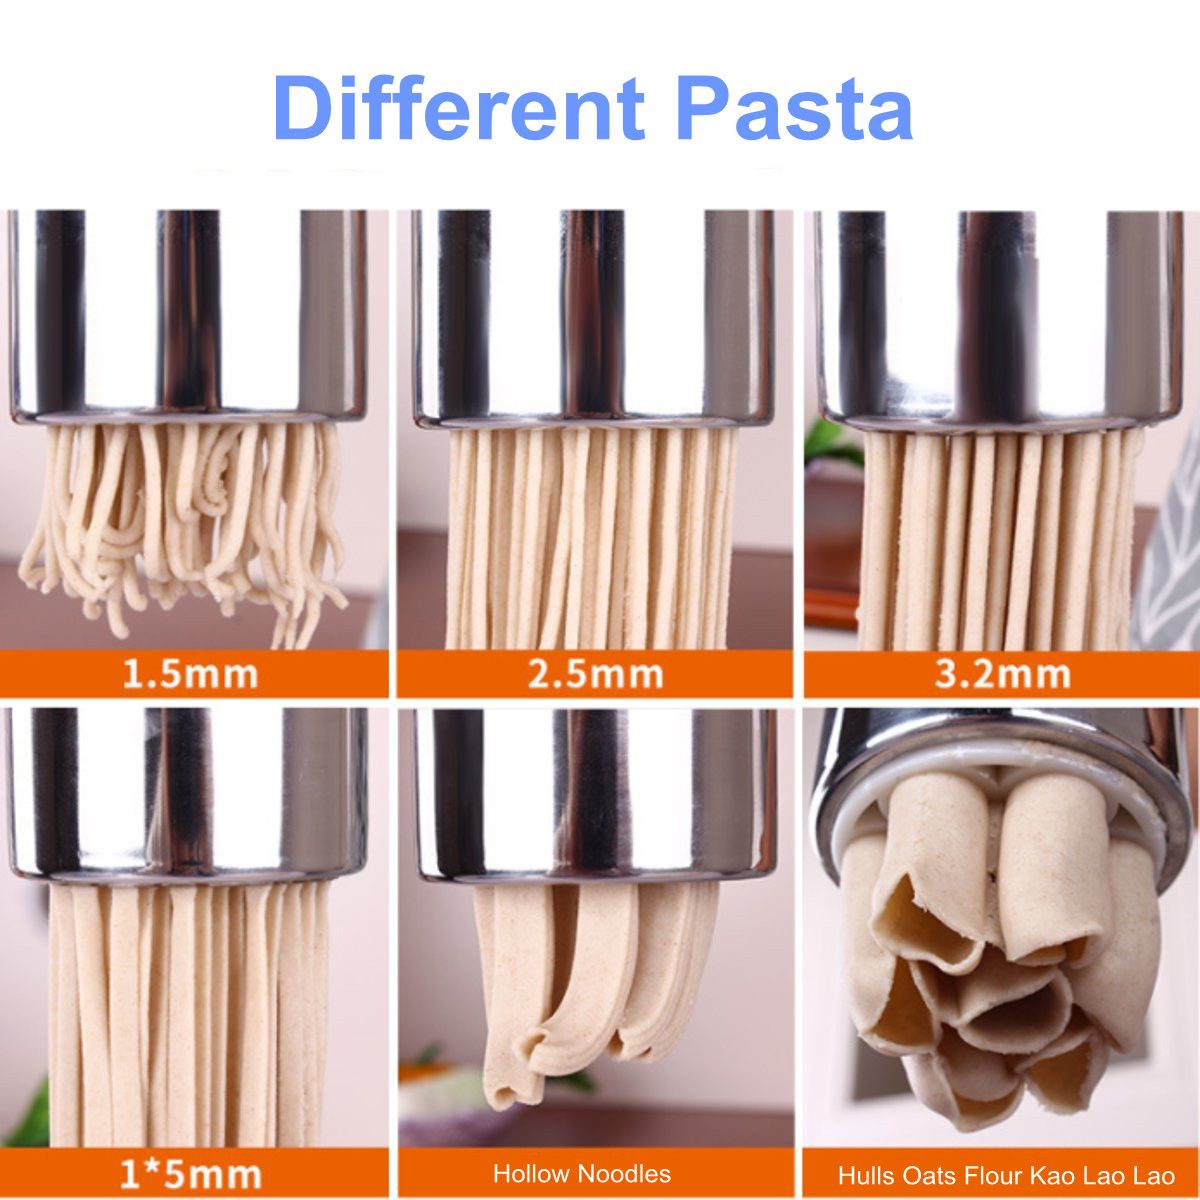 7-Mold-Stainless-Steel-Fresh-Pasta-Manual-Noodle-Maker-Meat-Press-Kitchen-Party-1626915